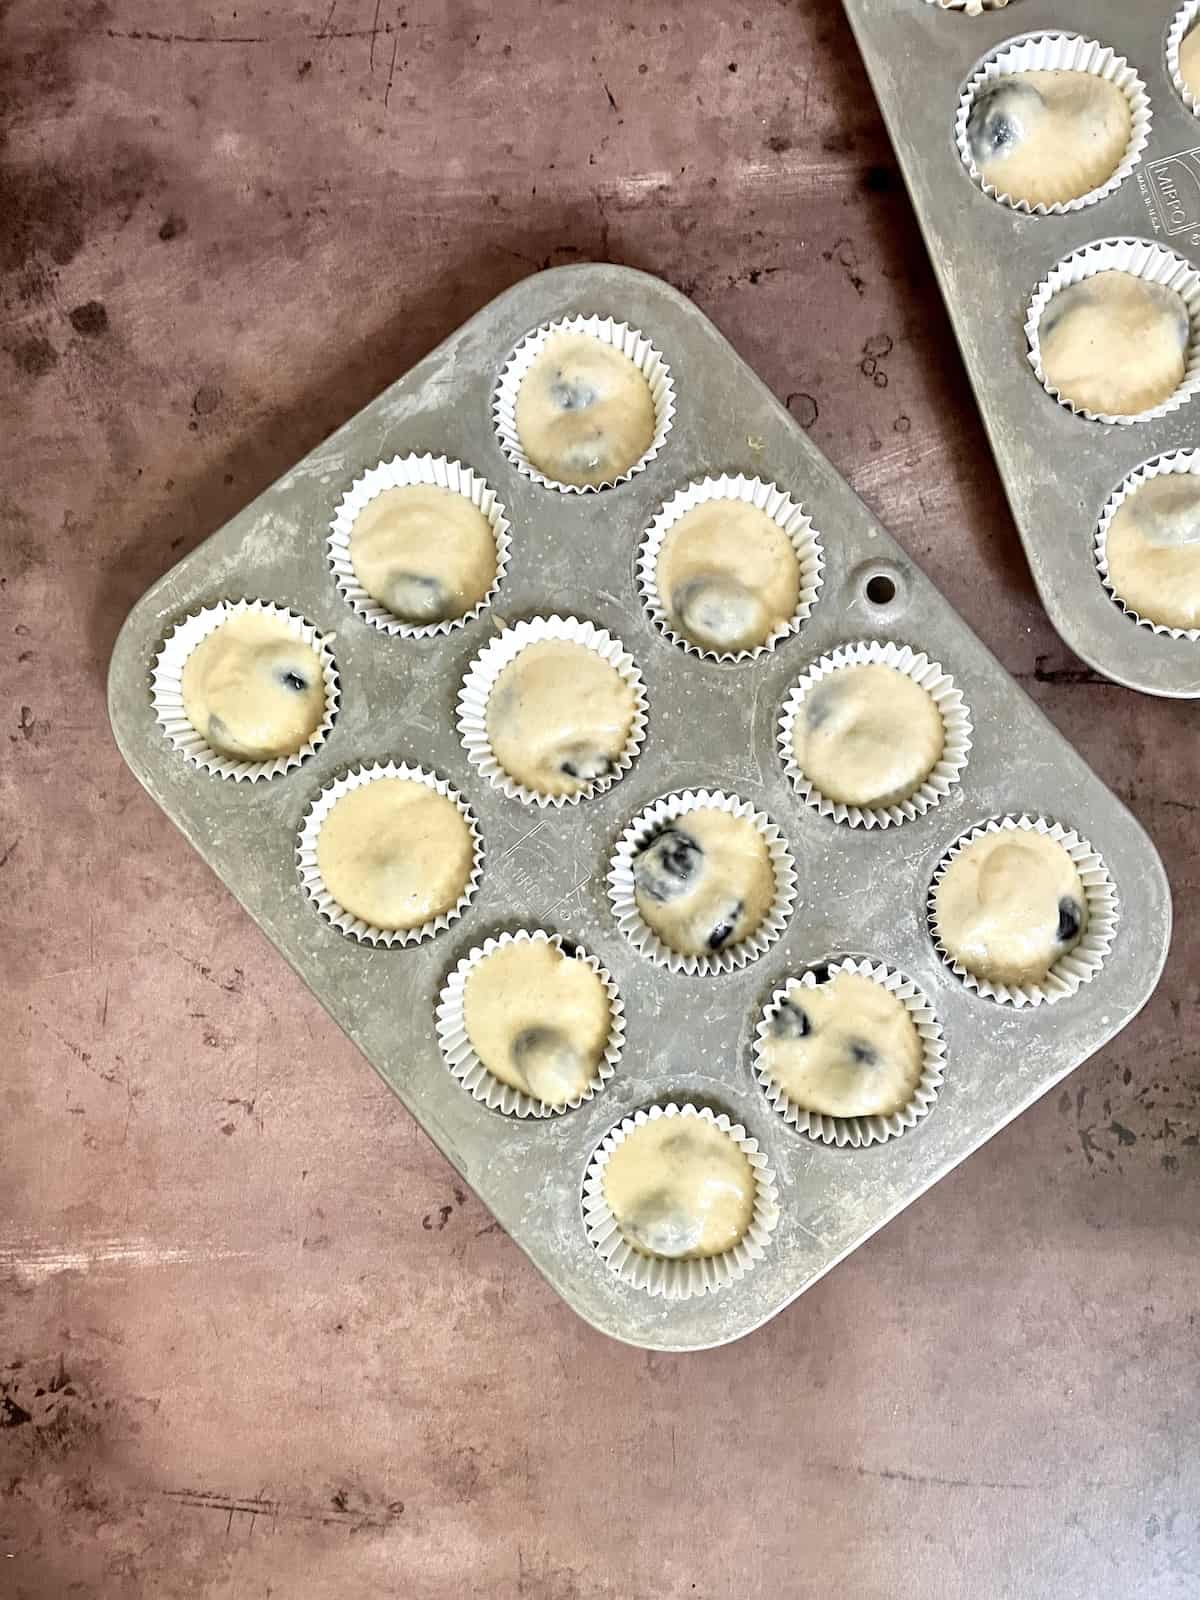 Batter in lined muffin tin.